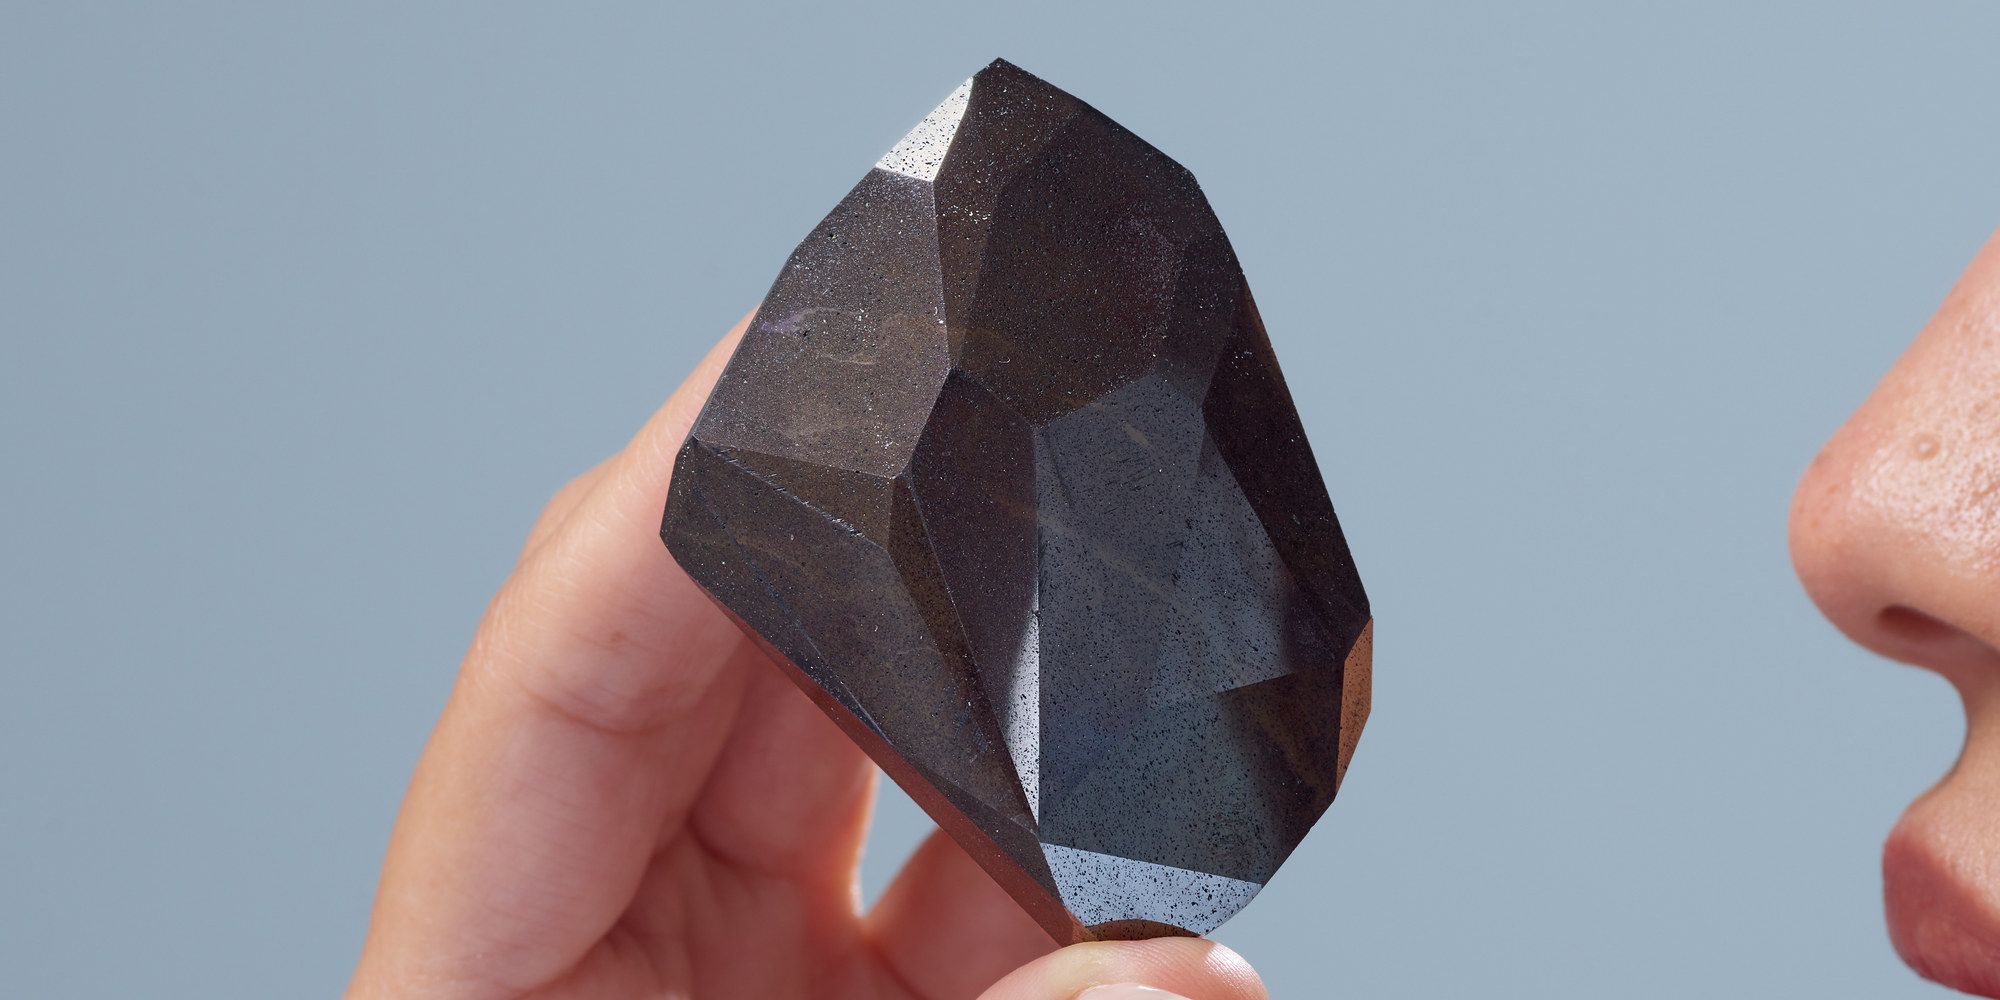 A Huge Black Diamond, Purportedly From Outer Space, Is Now Up for Sale, Smart News